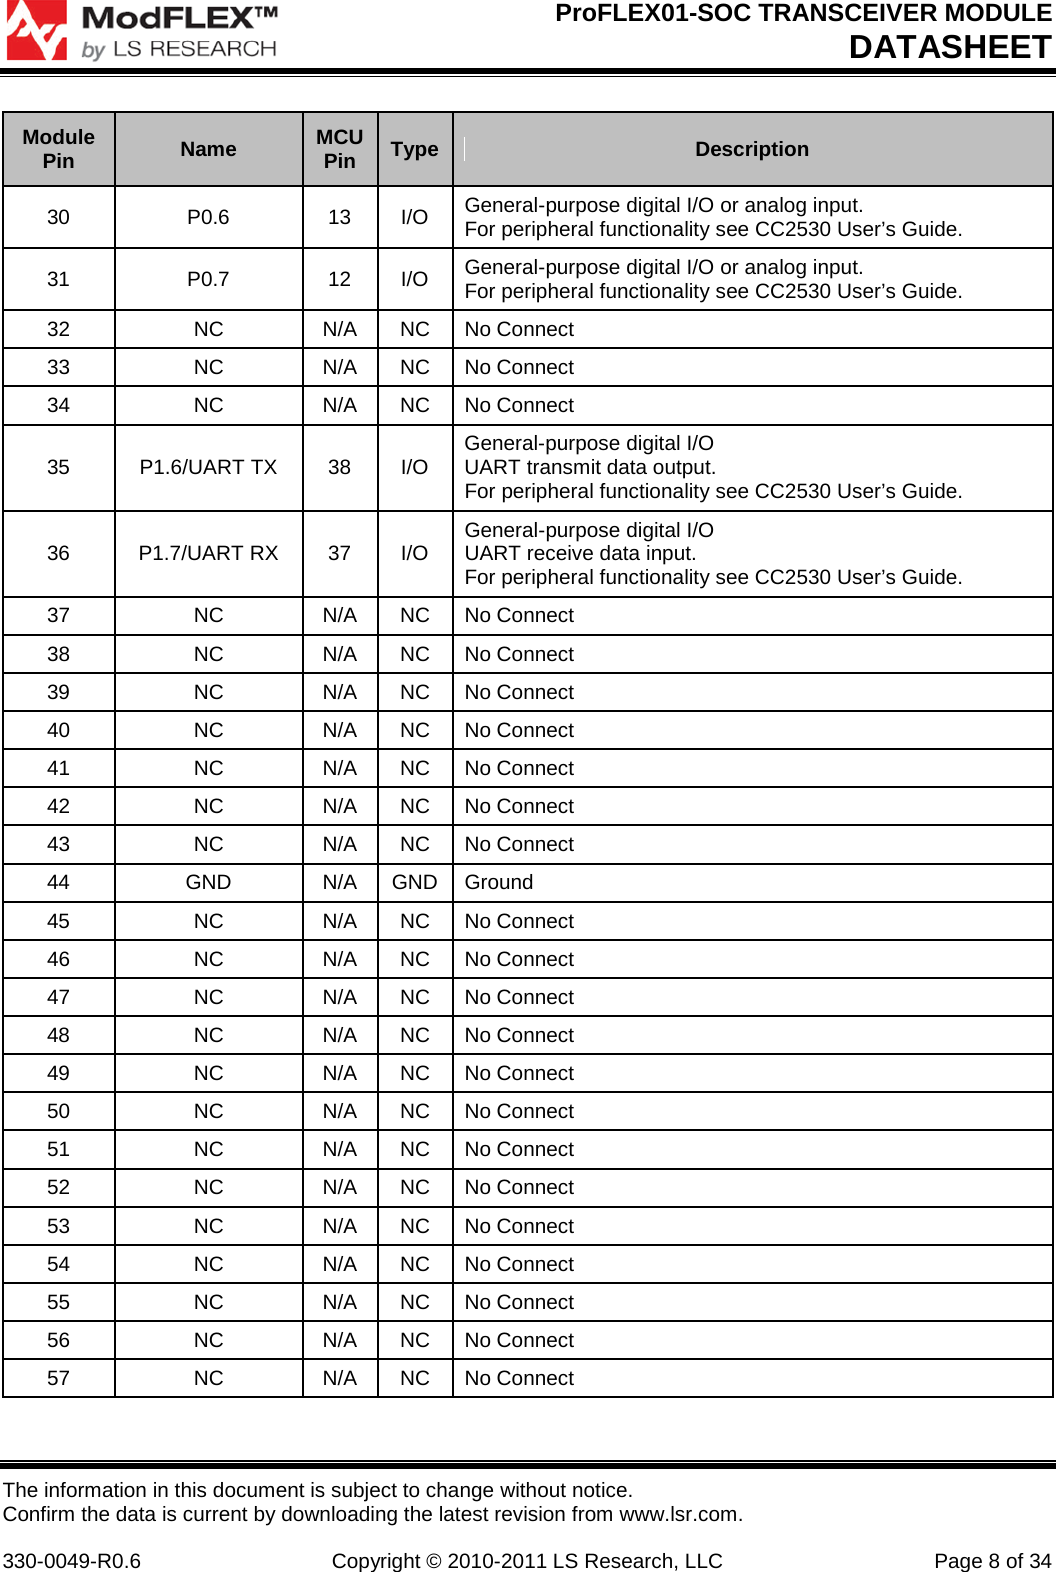 ProFLEX01-SOC TRANSCEIVER MODULE DATASHEET The information in this document is subject to change without notice. Confirm the data is current by downloading the latest revision from www.lsr.com.  330-0049-R0.6 Copyright © 2010-2011 LS Research, LLC Page 8 of 34 Module Pin Name MCU Pin Type Description 30  P0.6  13  I/O General-purpose digital I/O or analog input. For peripheral functionality see CC2530 User’s Guide. 31  P0.7 12 I/O General-purpose digital I/O or analog input. For peripheral functionality see CC2530 User’s Guide. 32 NC N/A NC No Connect 33 NC N/A NC No Connect 34 NC N/A NC No Connect 35  P1.6/UART TX 38 I/O General-purpose digital I/O UART transmit data output. For peripheral functionality see CC2530 User’s Guide. 36  P1.7/UART RX  37  I/O General-purpose digital I/O UART receive data input. For peripheral functionality see CC2530 User’s Guide. 37 NC N/A NC No Connect 38 NC N/A NC No Connect 39 NC N/A NC No Connect 40 NC N/A NC No Connect 41 NC N/A NC No Connect 42 NC N/A NC No Connect 43 NC N/A NC No Connect 44 GND N/A GND Ground 45 NC N/A NC No Connect 46 NC N/A NC No Connect 47 NC N/A NC No Connect 48 NC N/A NC No Connect 49 NC N/A NC No Connect 50 NC N/A NC No Connect 51 NC N/A NC No Connect 52 NC N/A NC No Connect 53 NC N/A NC No Connect 54 NC N/A NC No Connect 55 NC N/A NC No Connect 56 NC N/A NC No Connect 57 NC N/A NC No Connect 